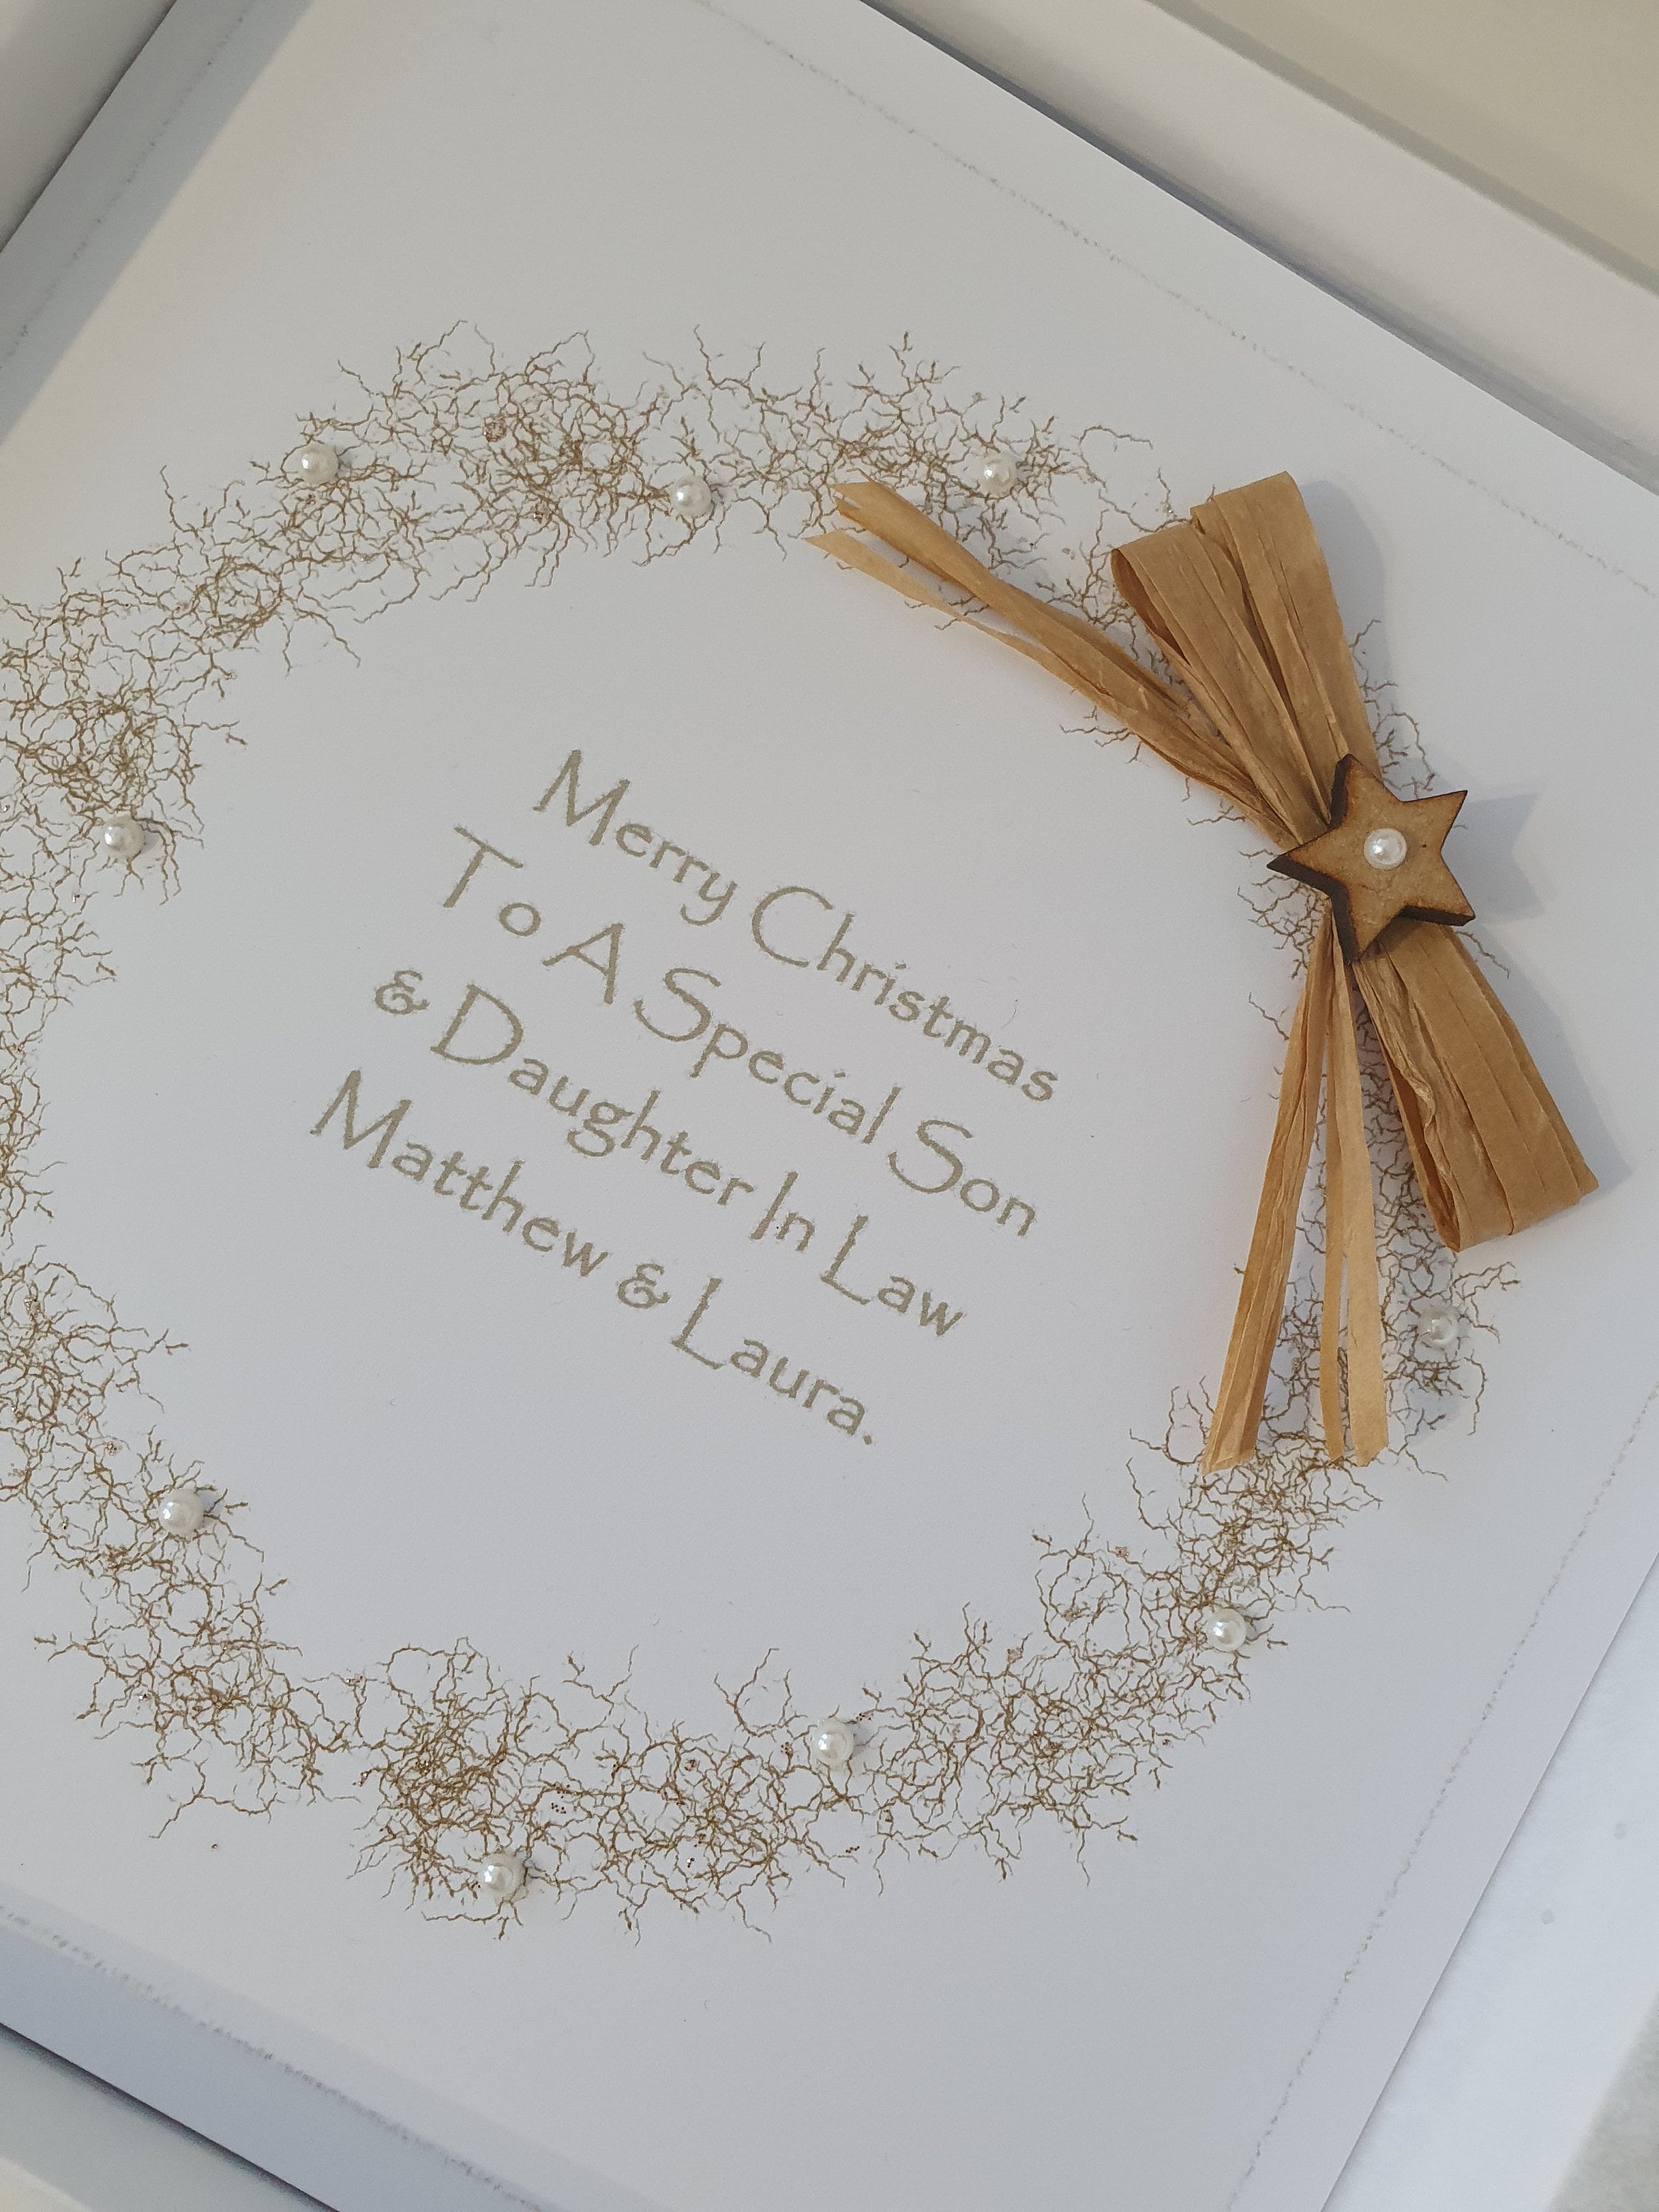 Personalised Contemporary Christmas Card Sister & Brother In Law  Any Relation Or Couple SKU1117